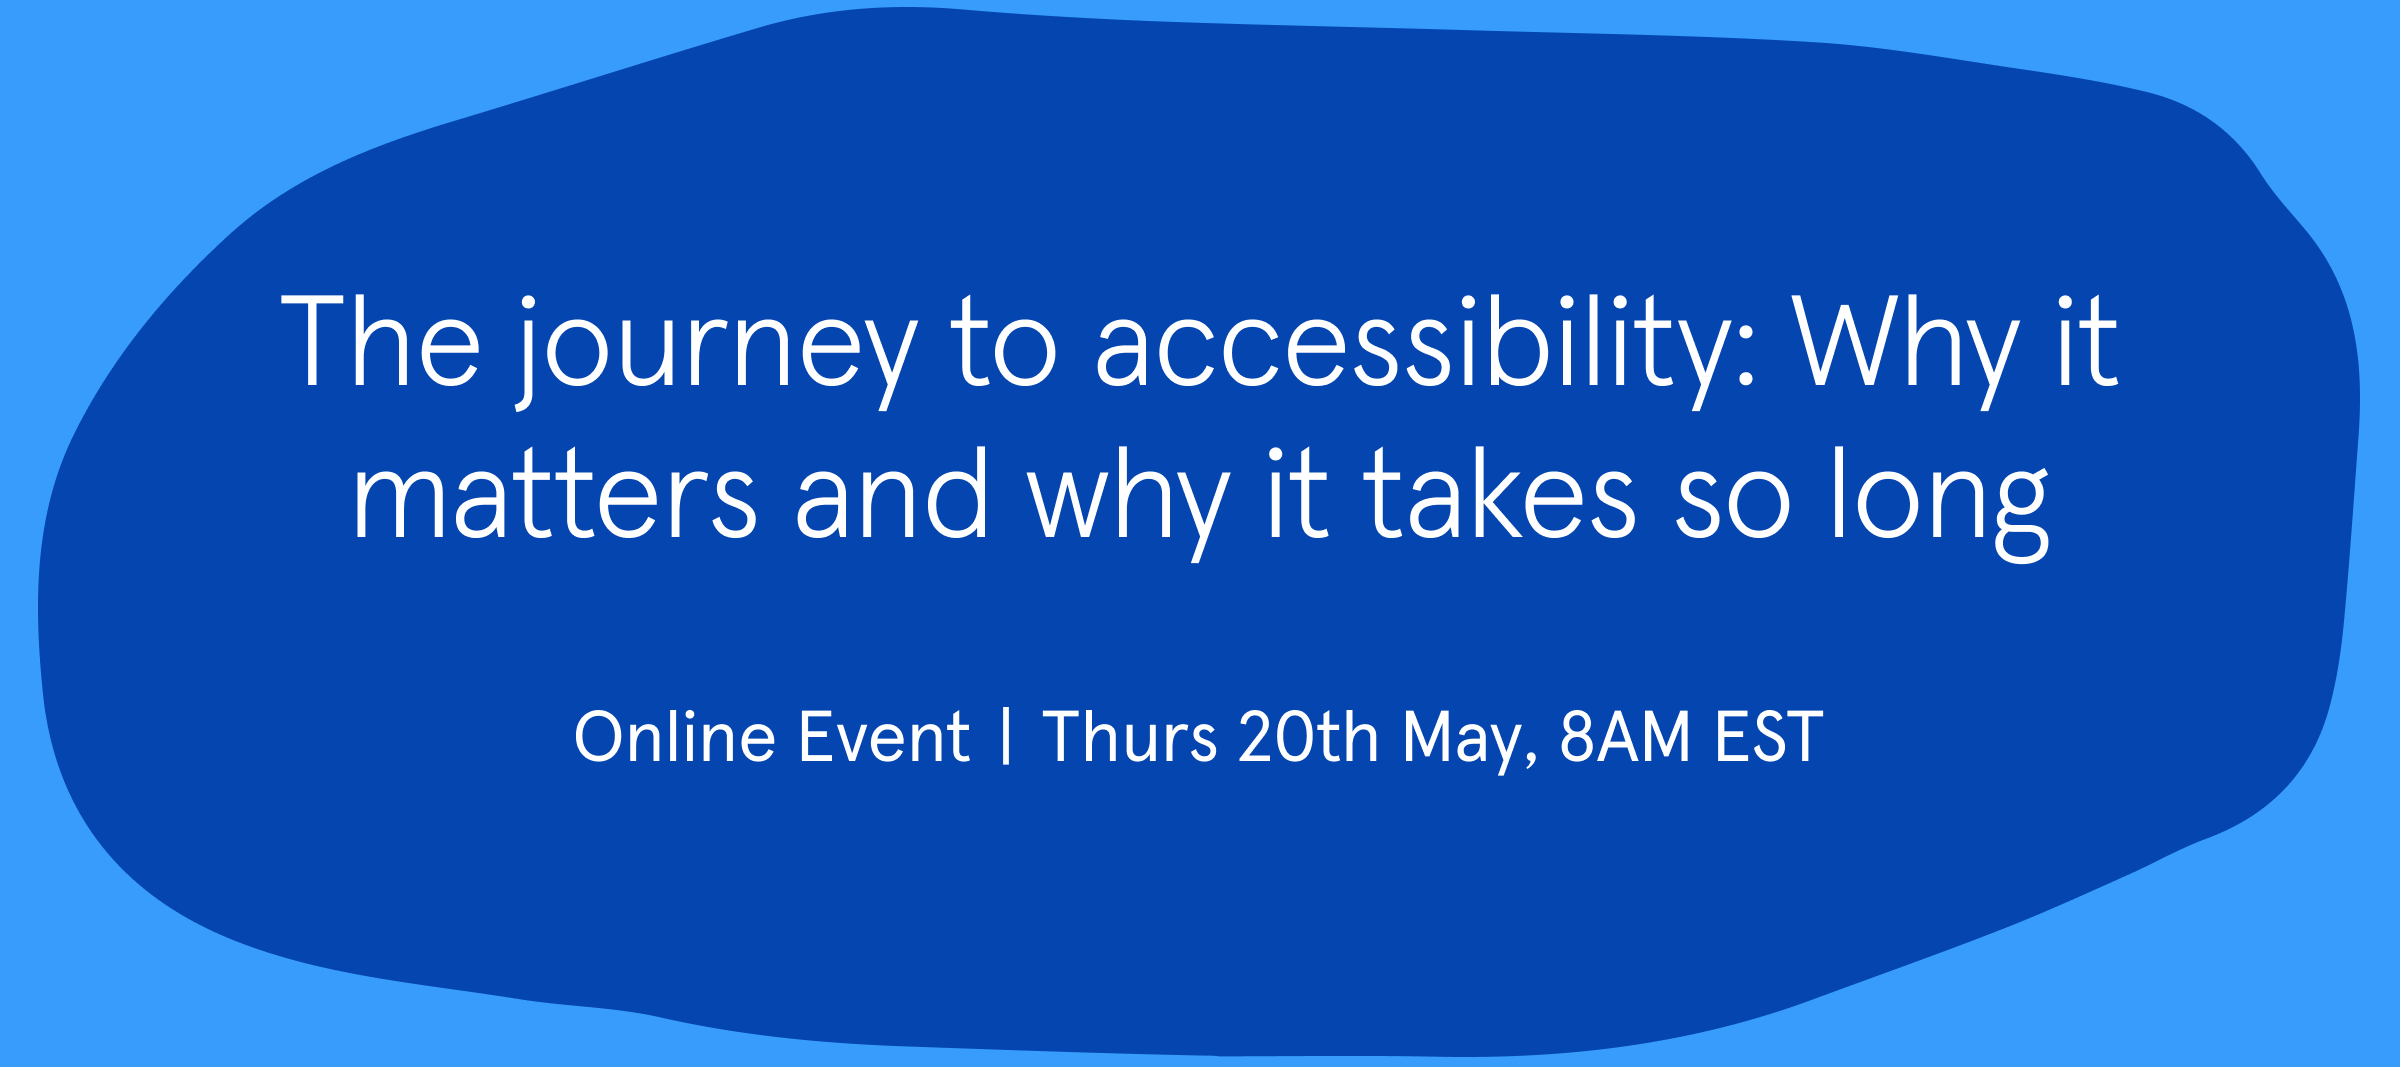 Accessibility and design: How Typeform designed an accessible journey, and  why it matters